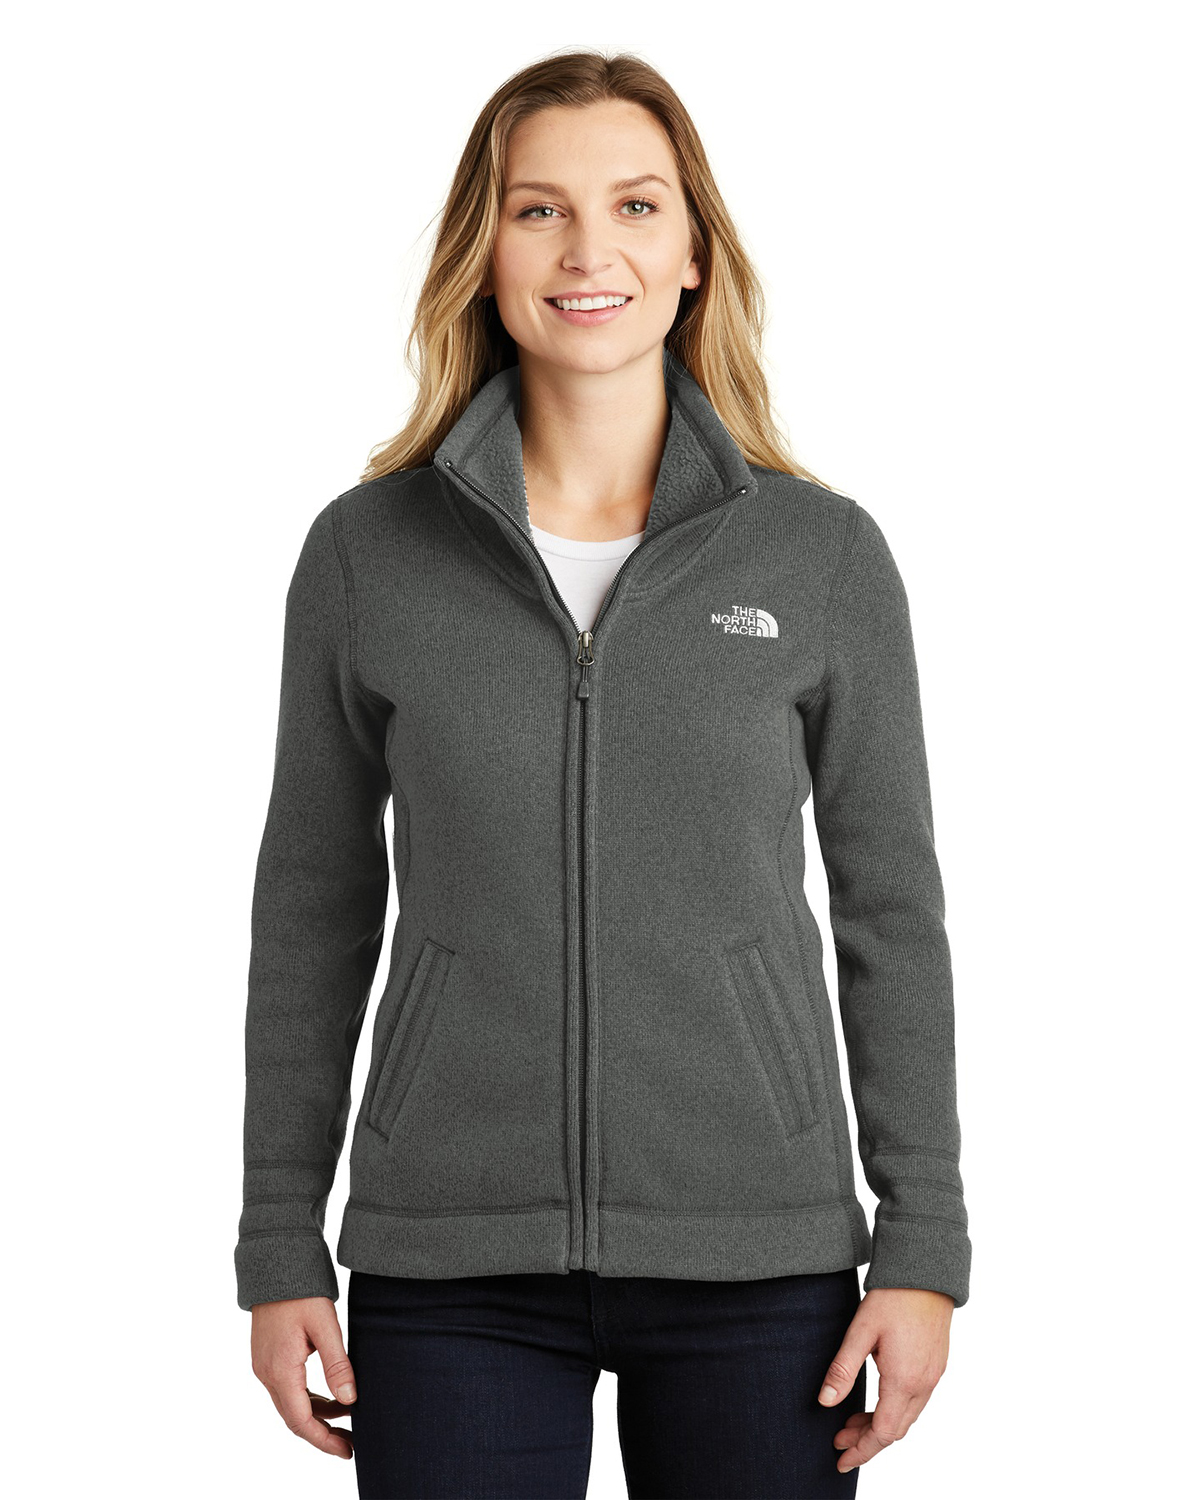 'The North Face NF0A3LH8 Ladies Sweater Fleece Jacket'